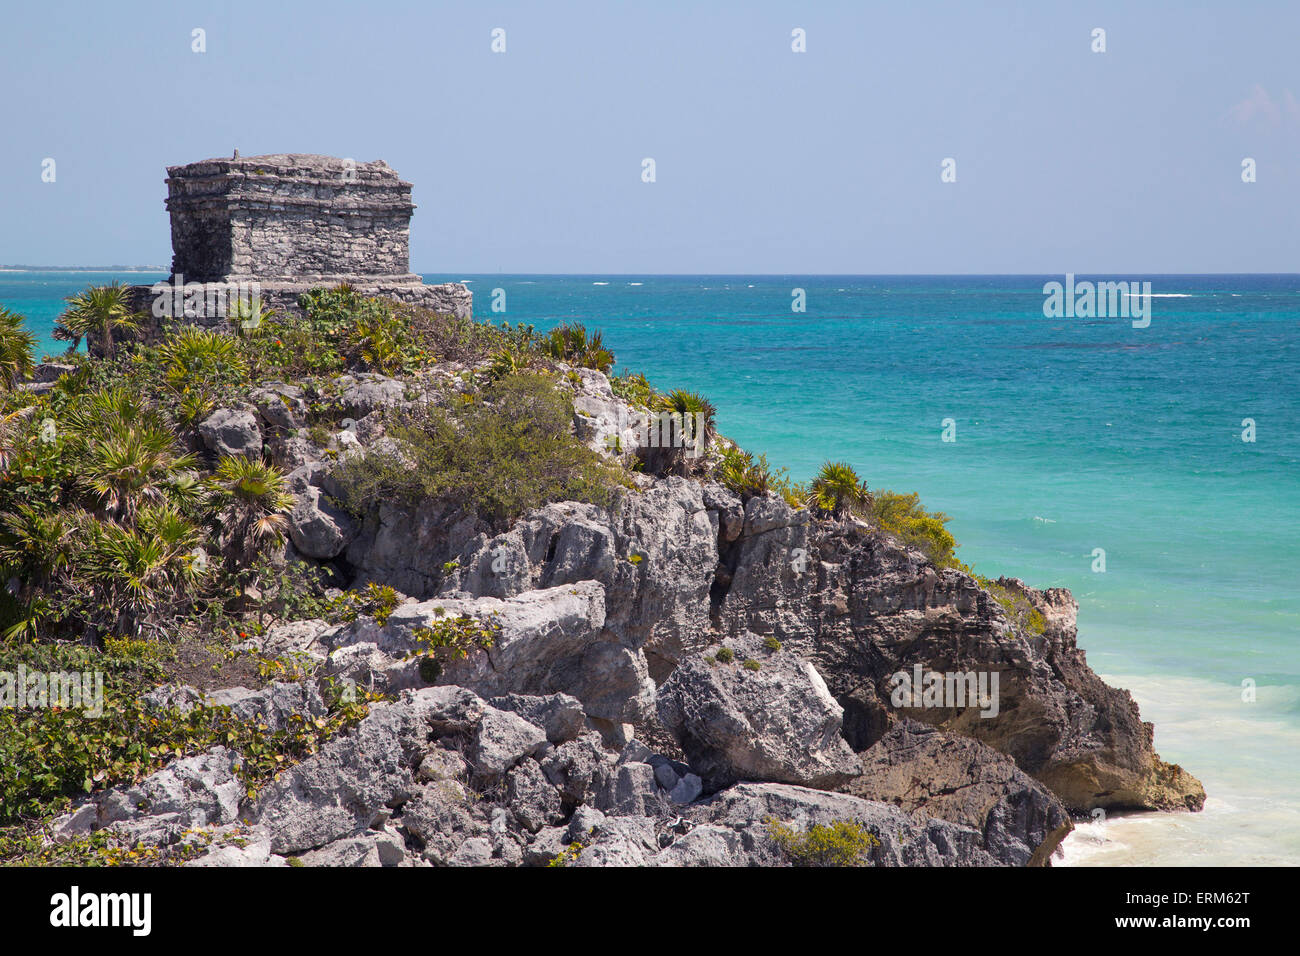 Temple of the Wind, Tulum, in the Mayan Riviera overlooking the aquamarine water of the Caribbean Sea shore, Mexico Stock Photo